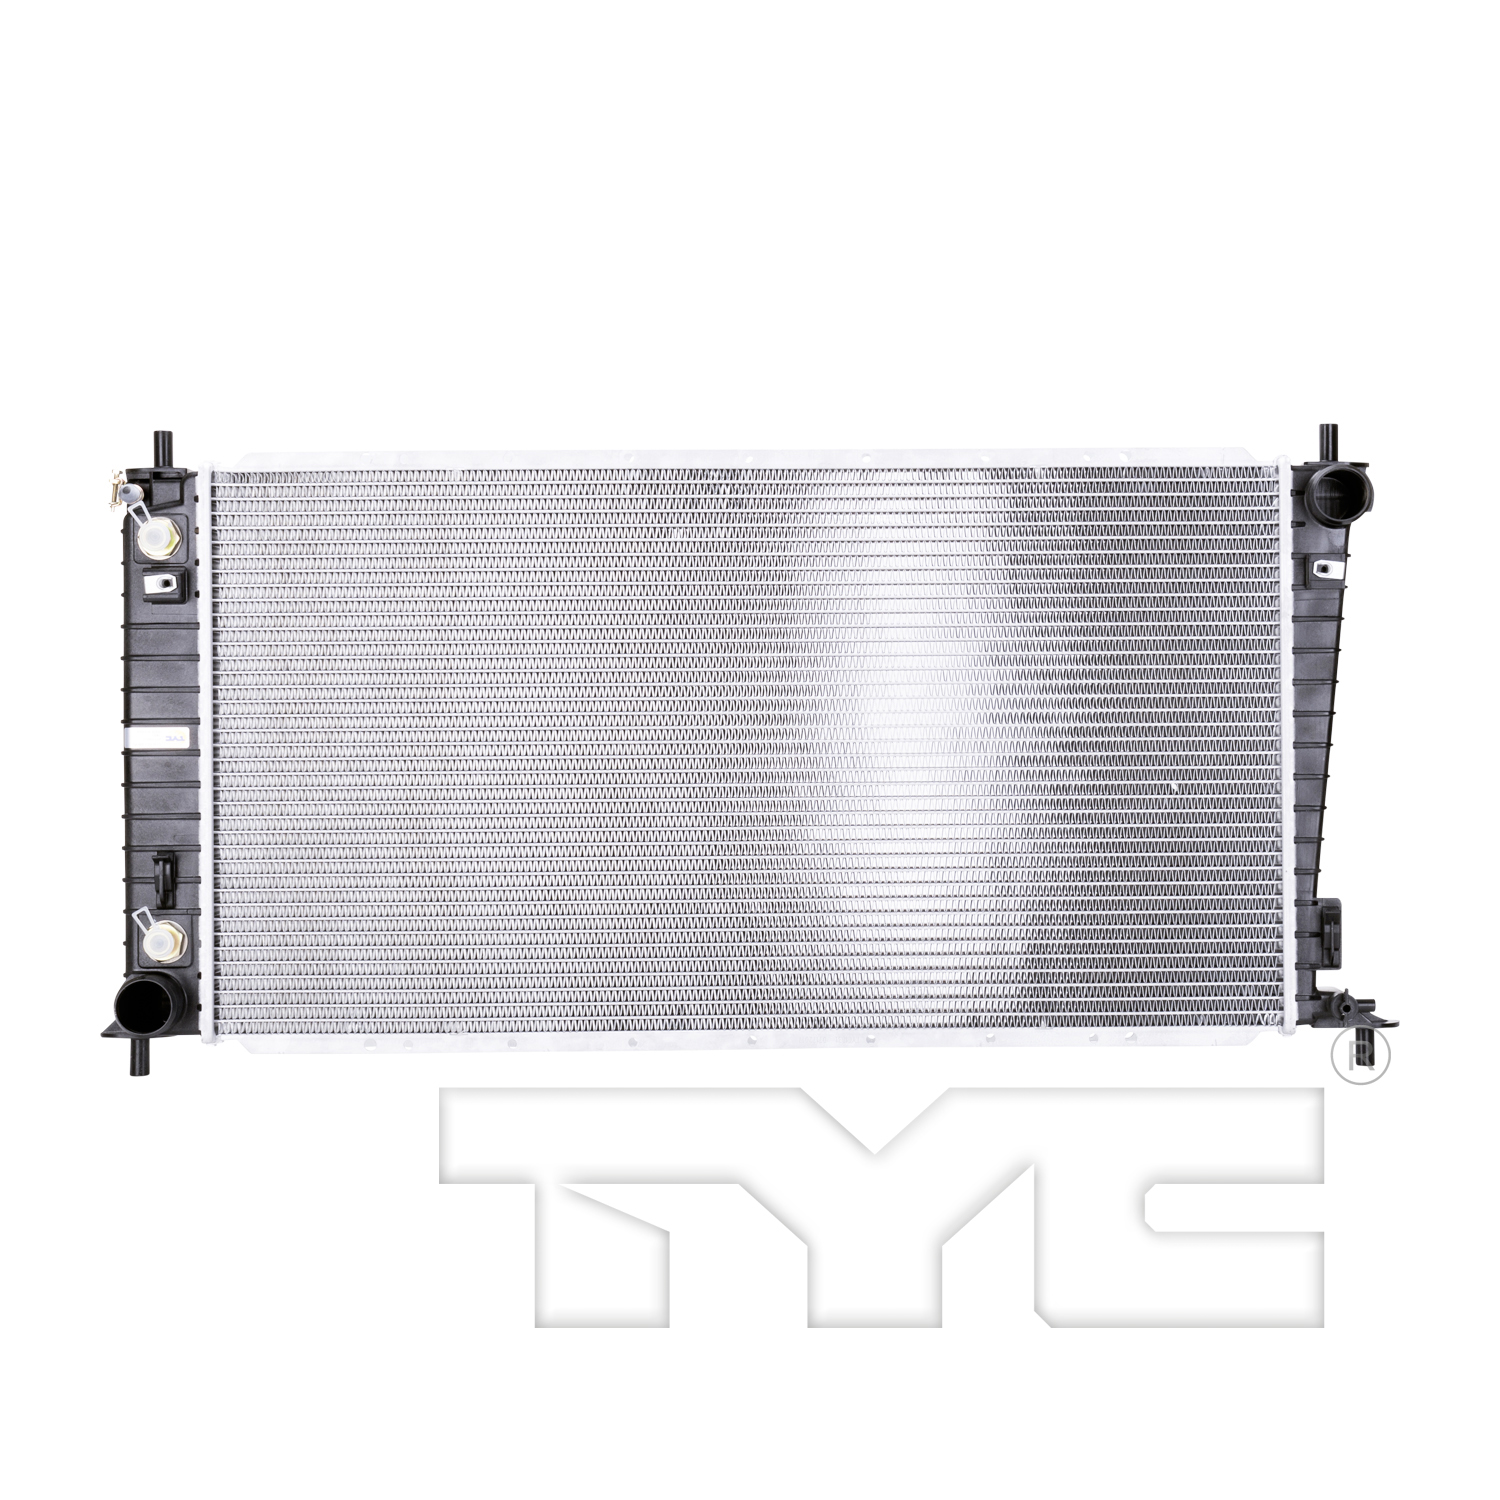 Aftermarket RADIATORS for FORD - F-150, F-150,97-99,Radiator assembly